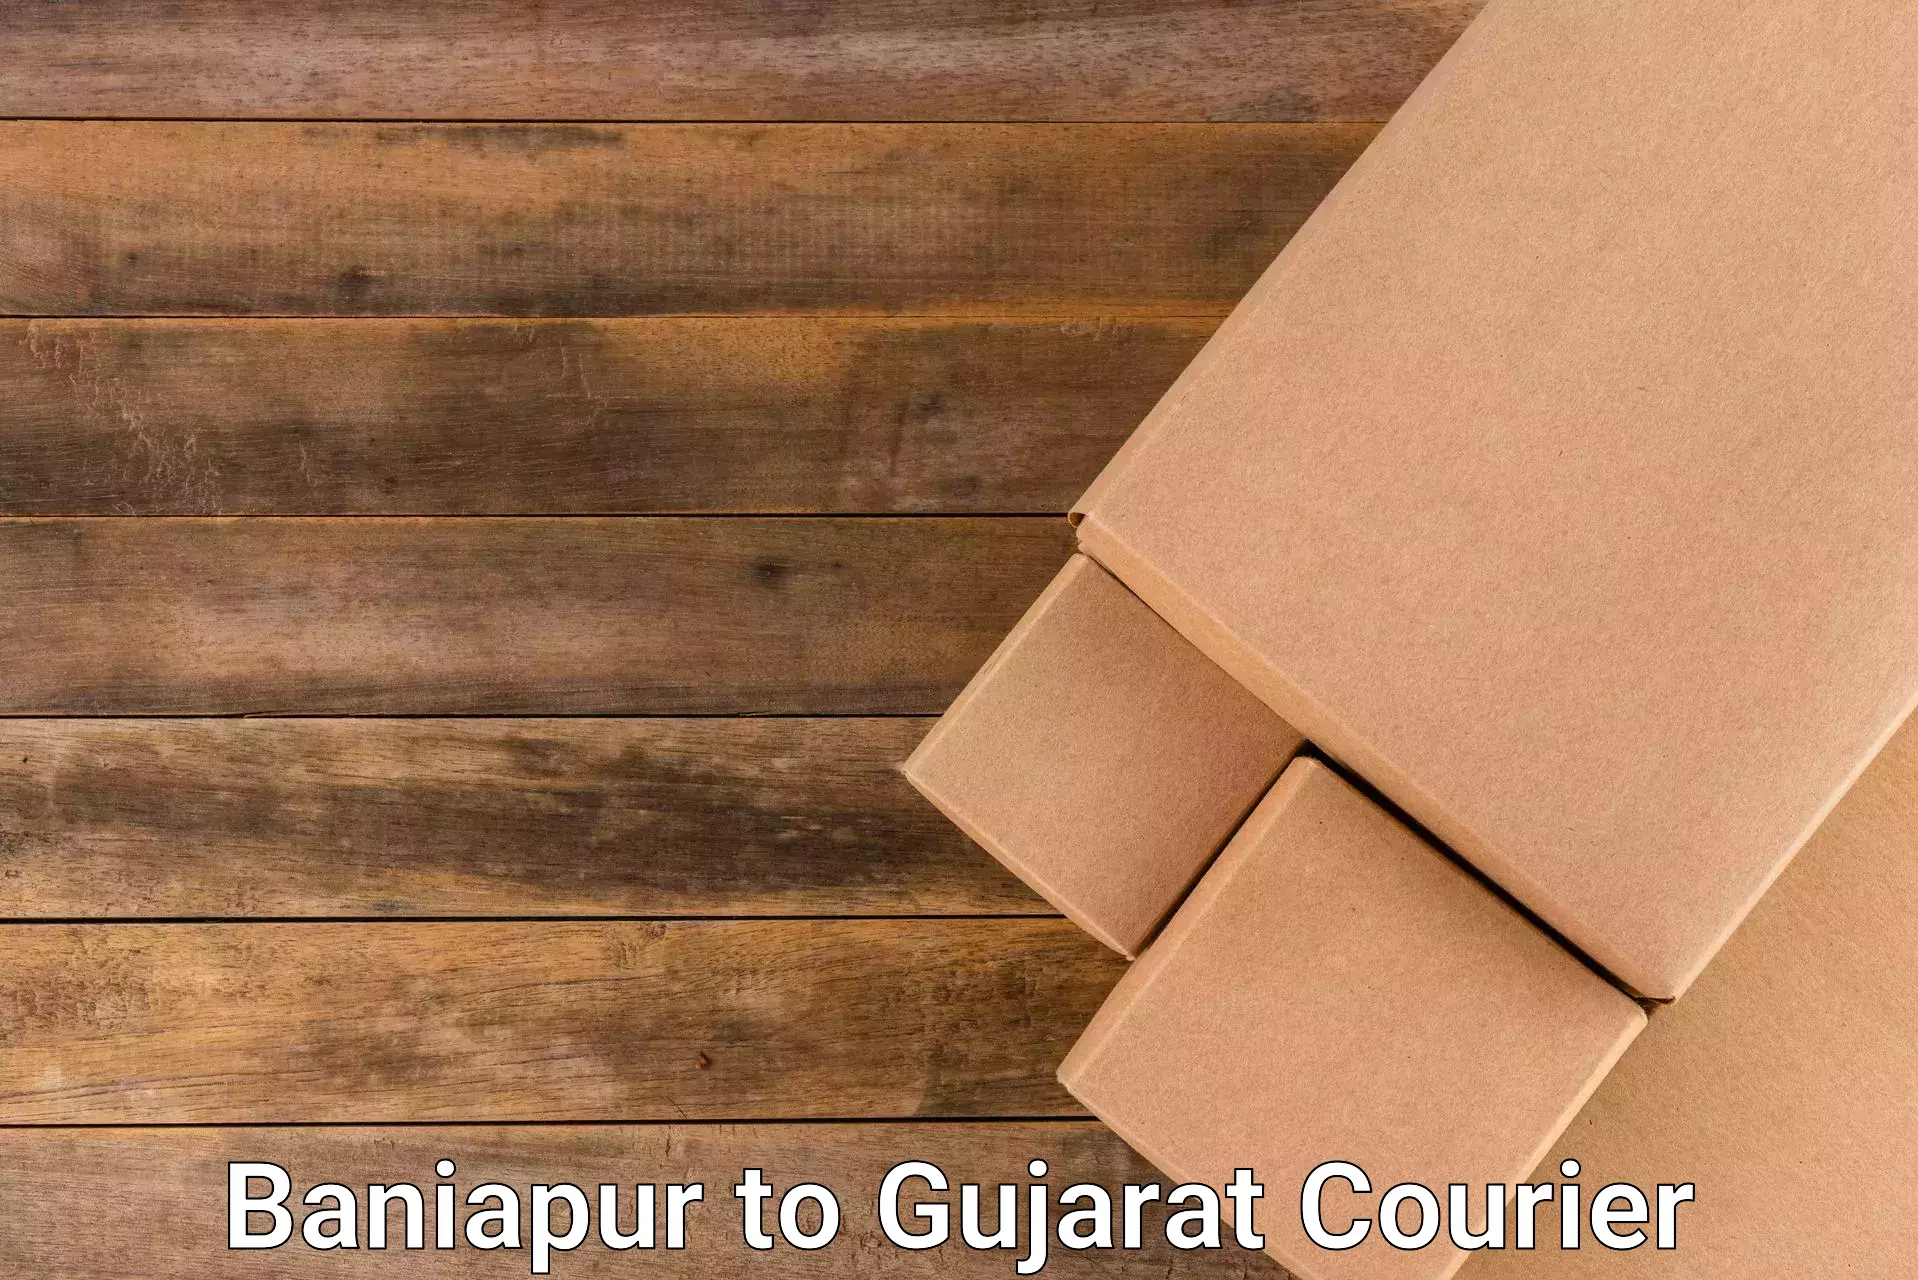 Multi-national courier services Baniapur to Songadh